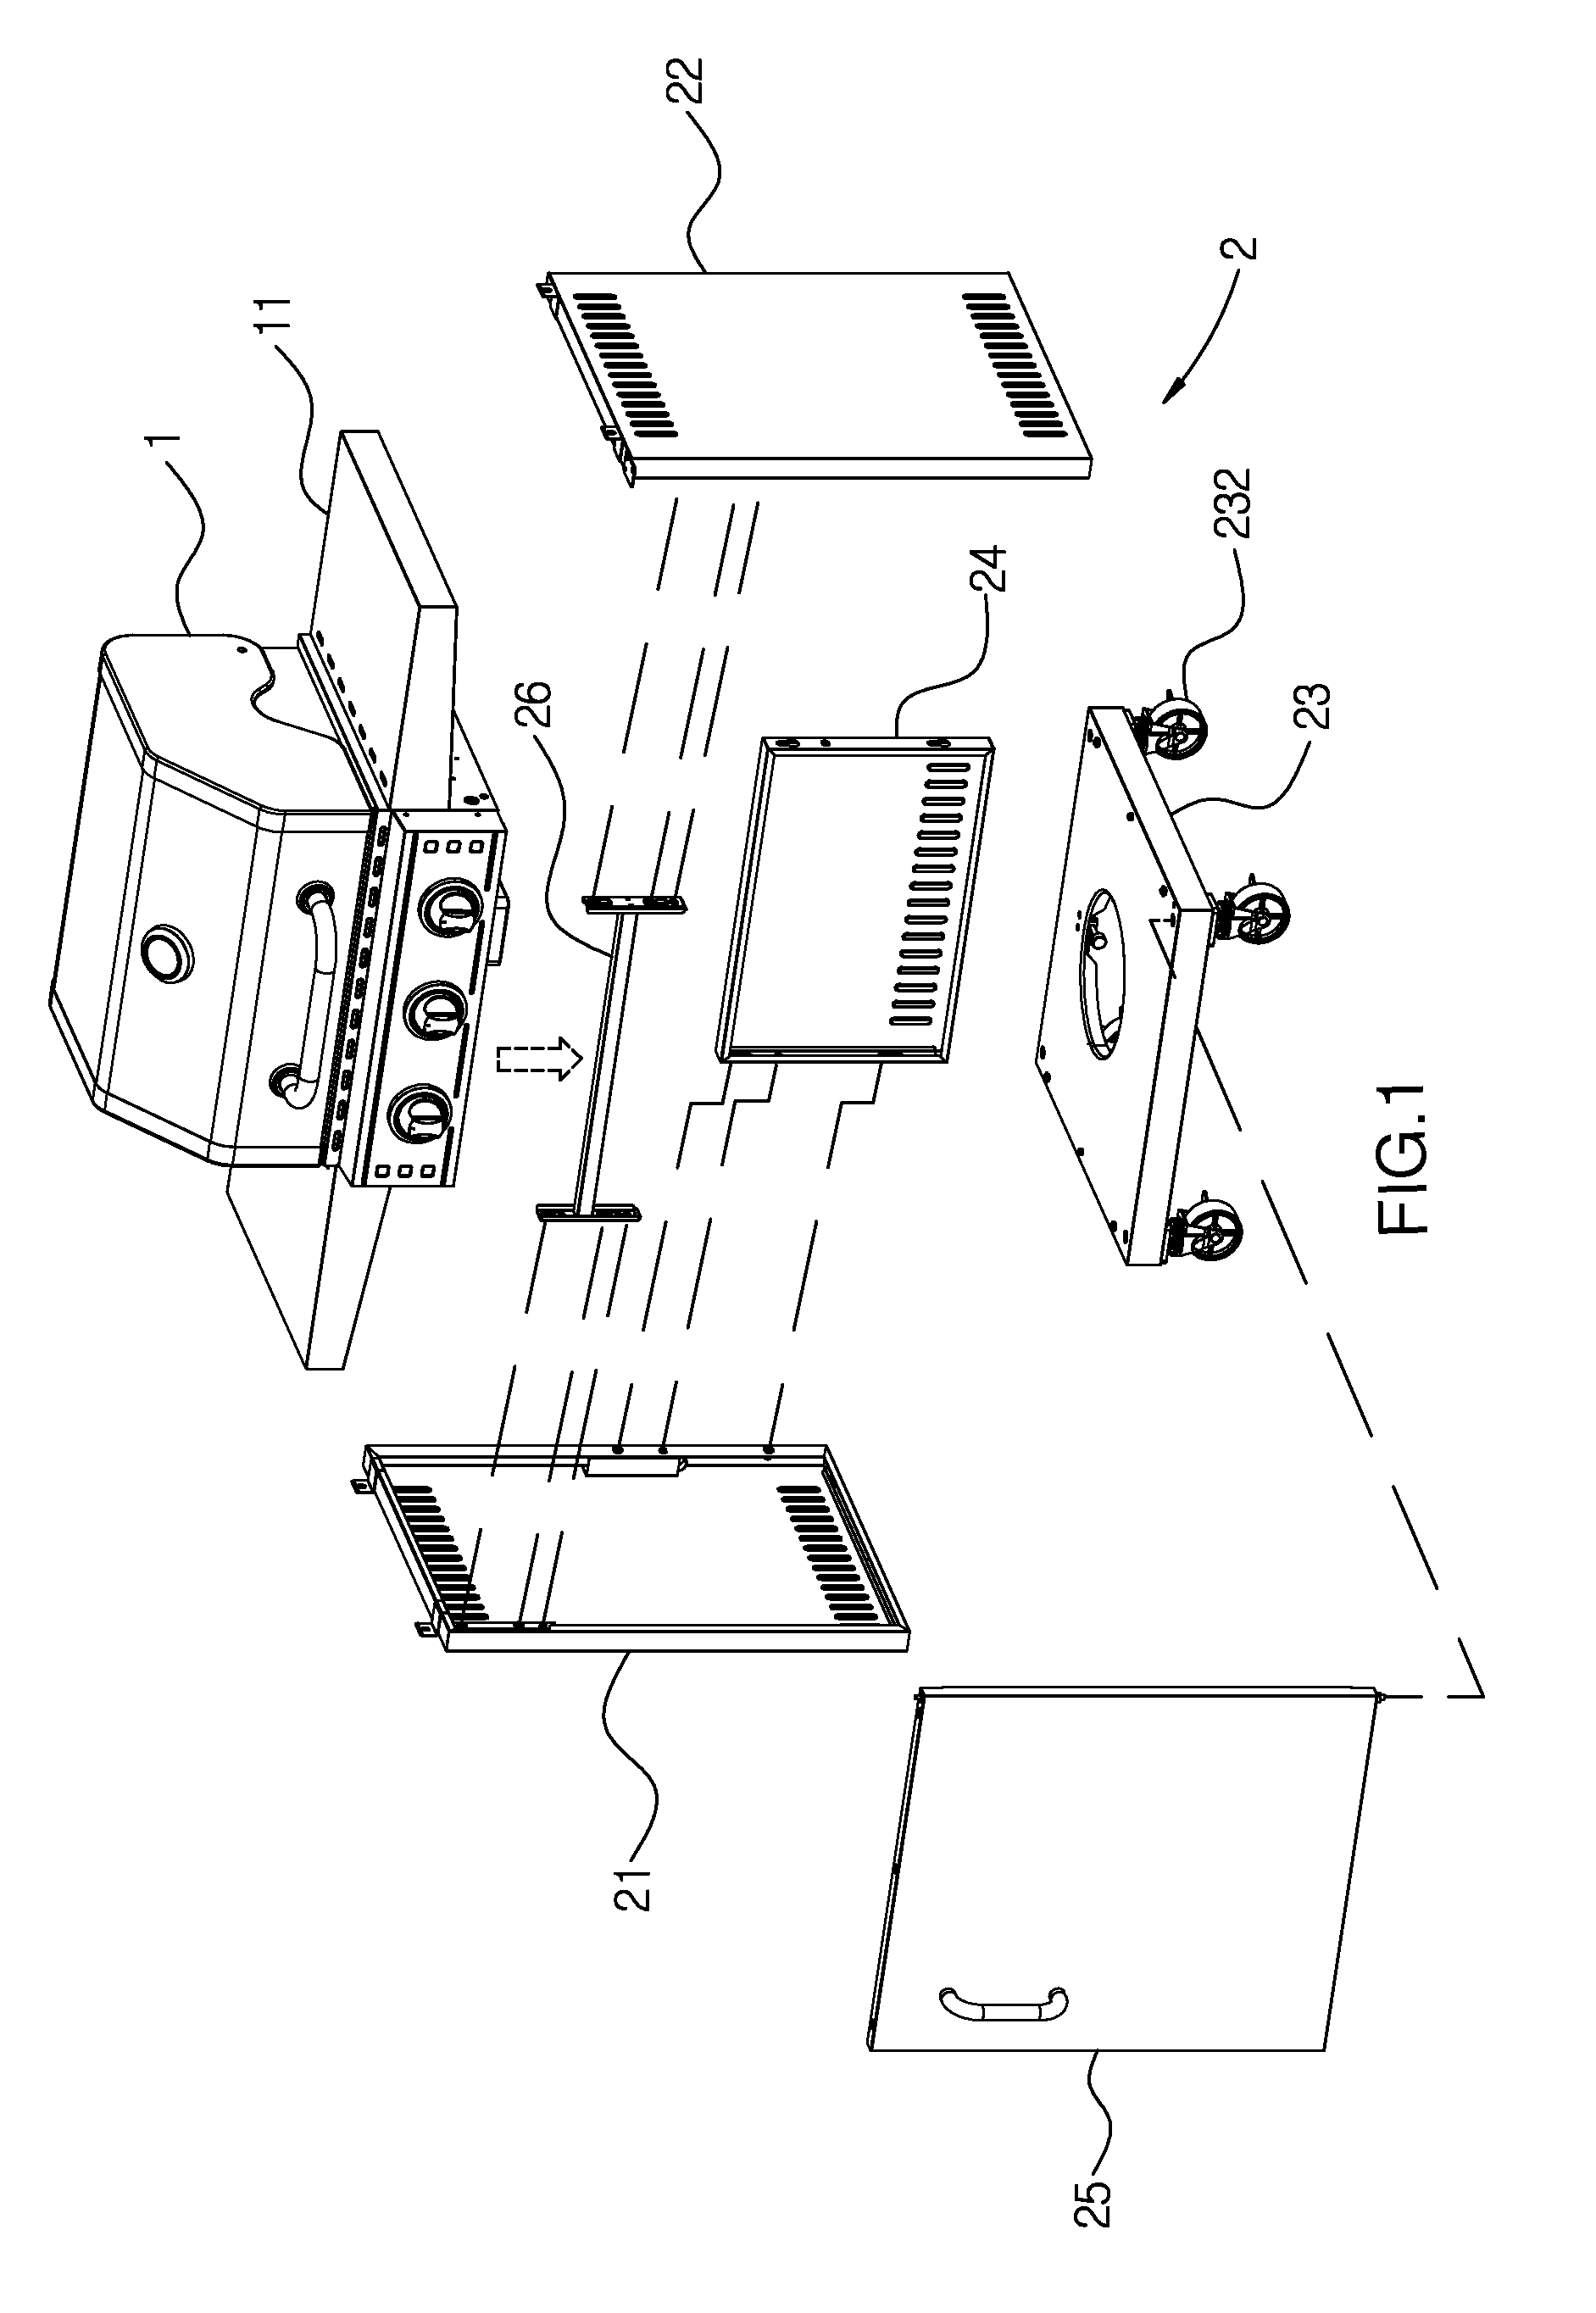 Connecting structure for barbecue grill